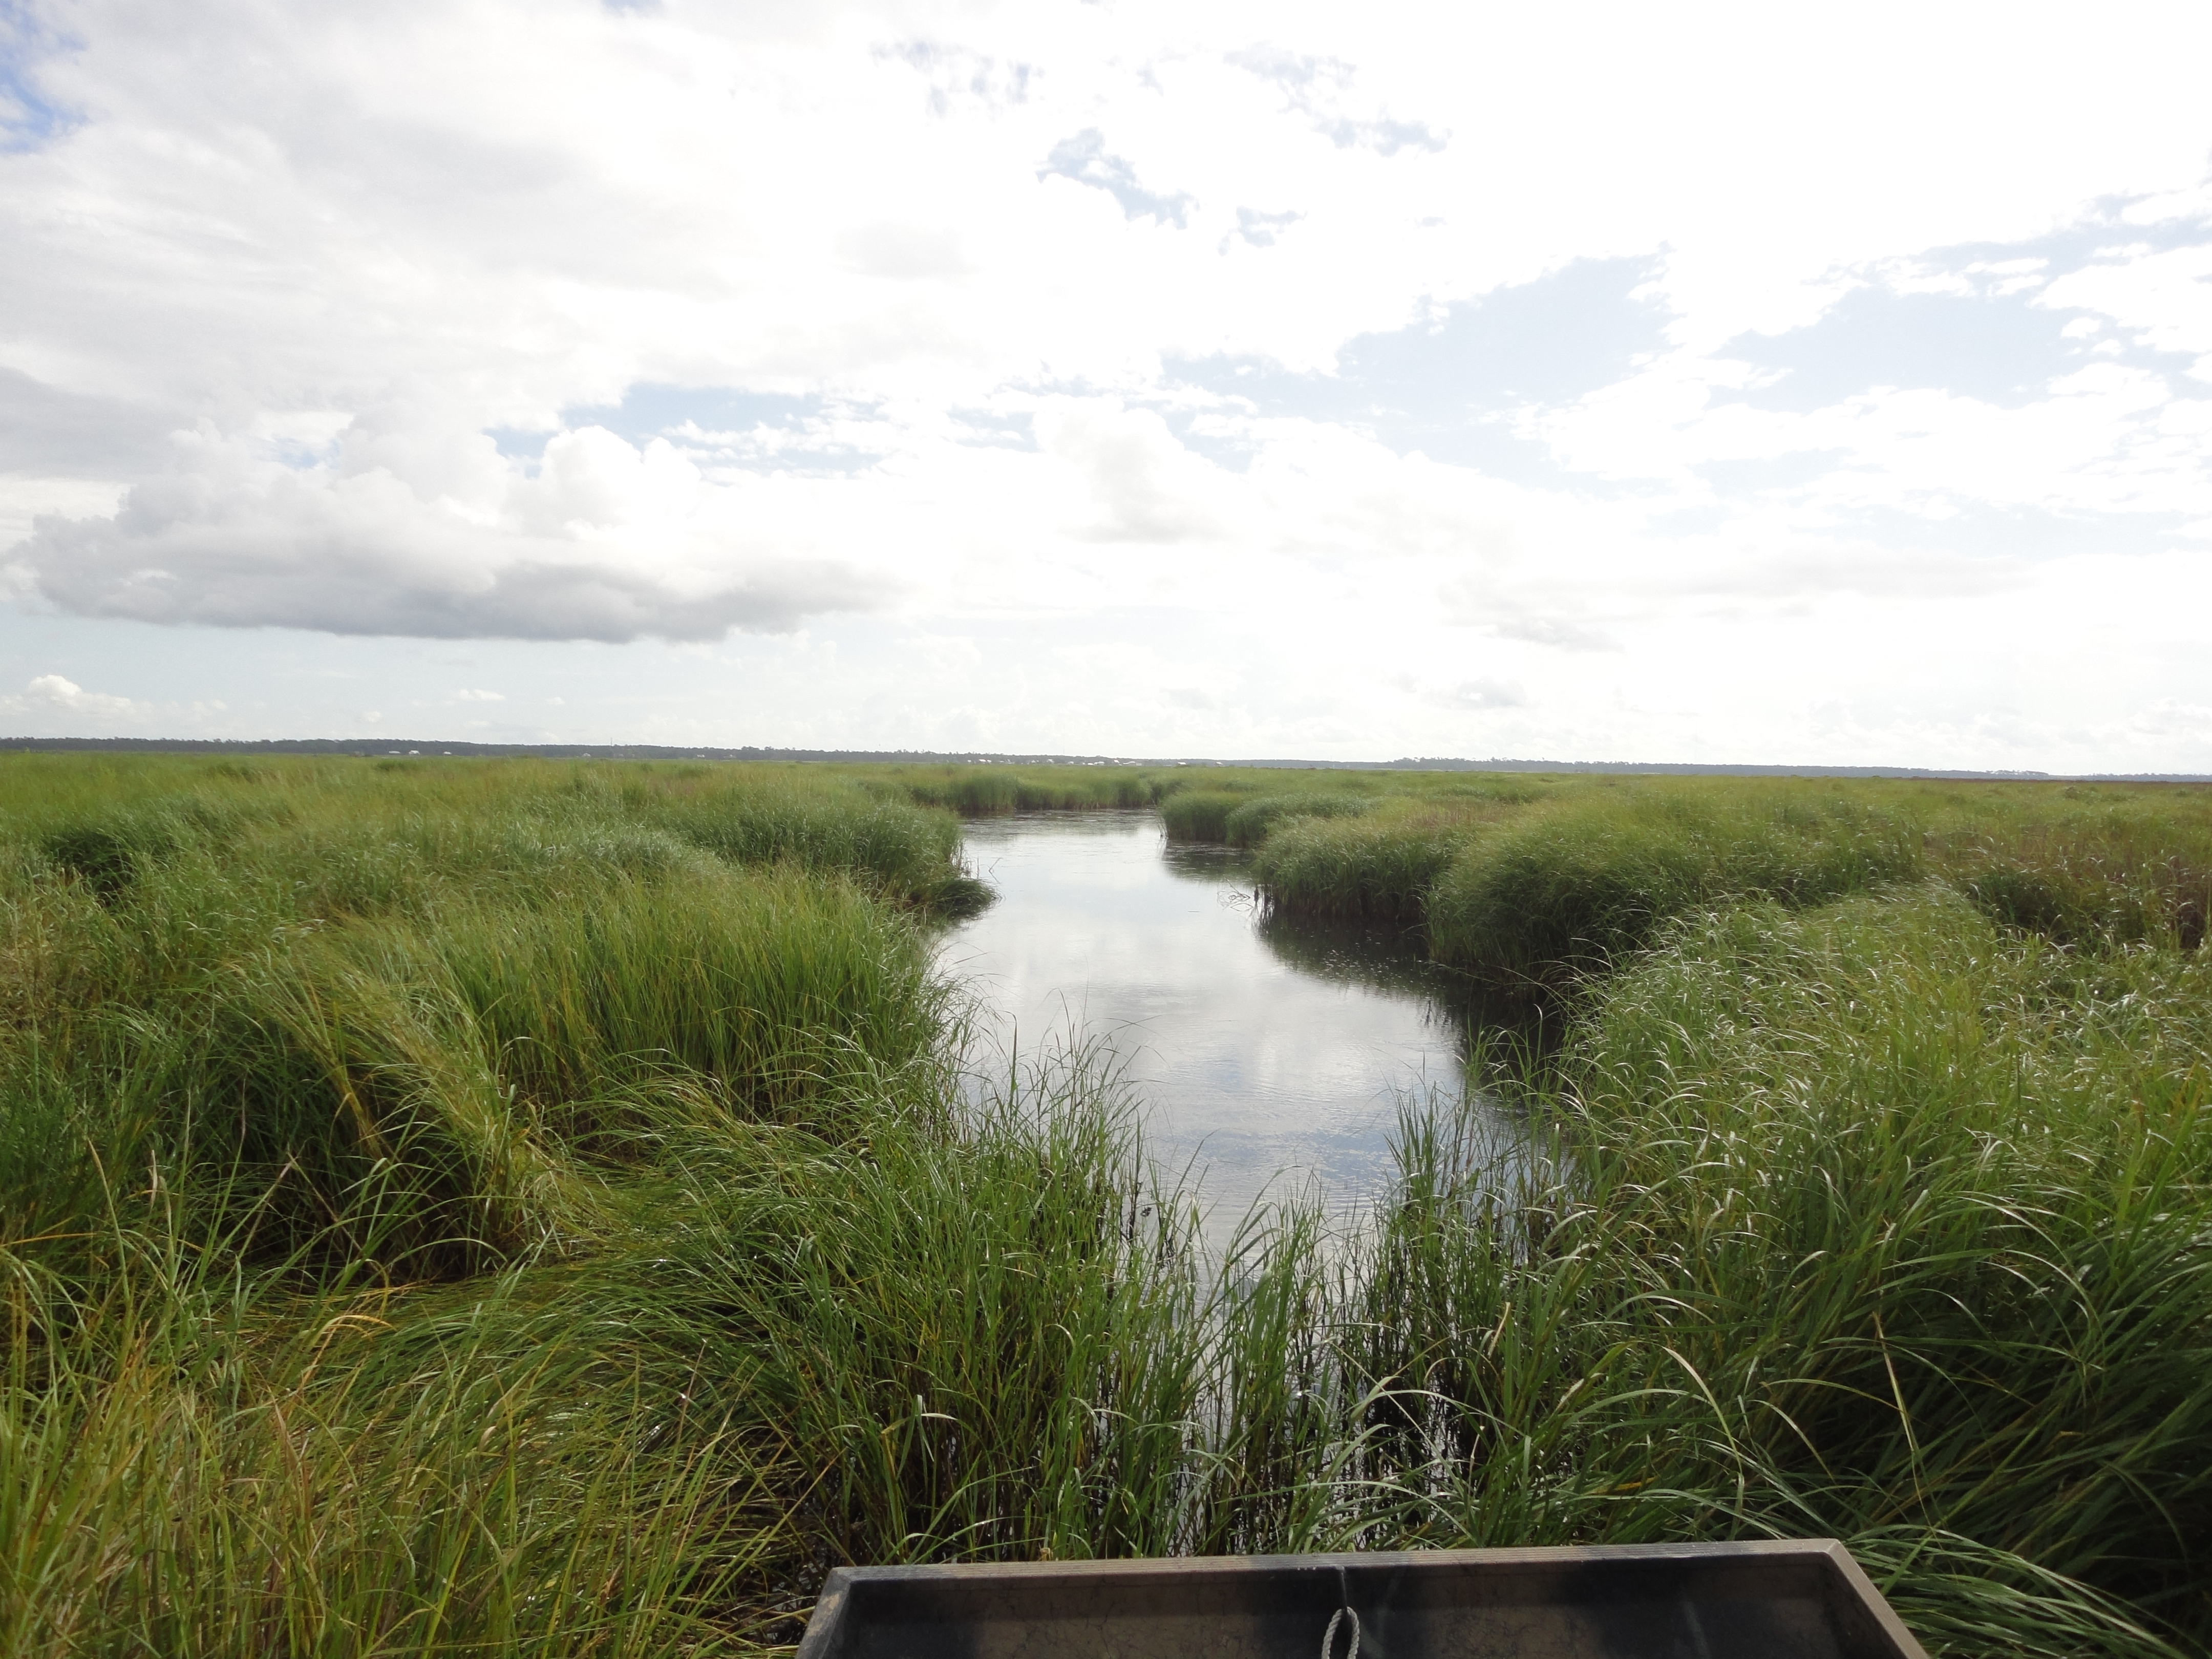 View of salt marsh plants from the back of a boat.